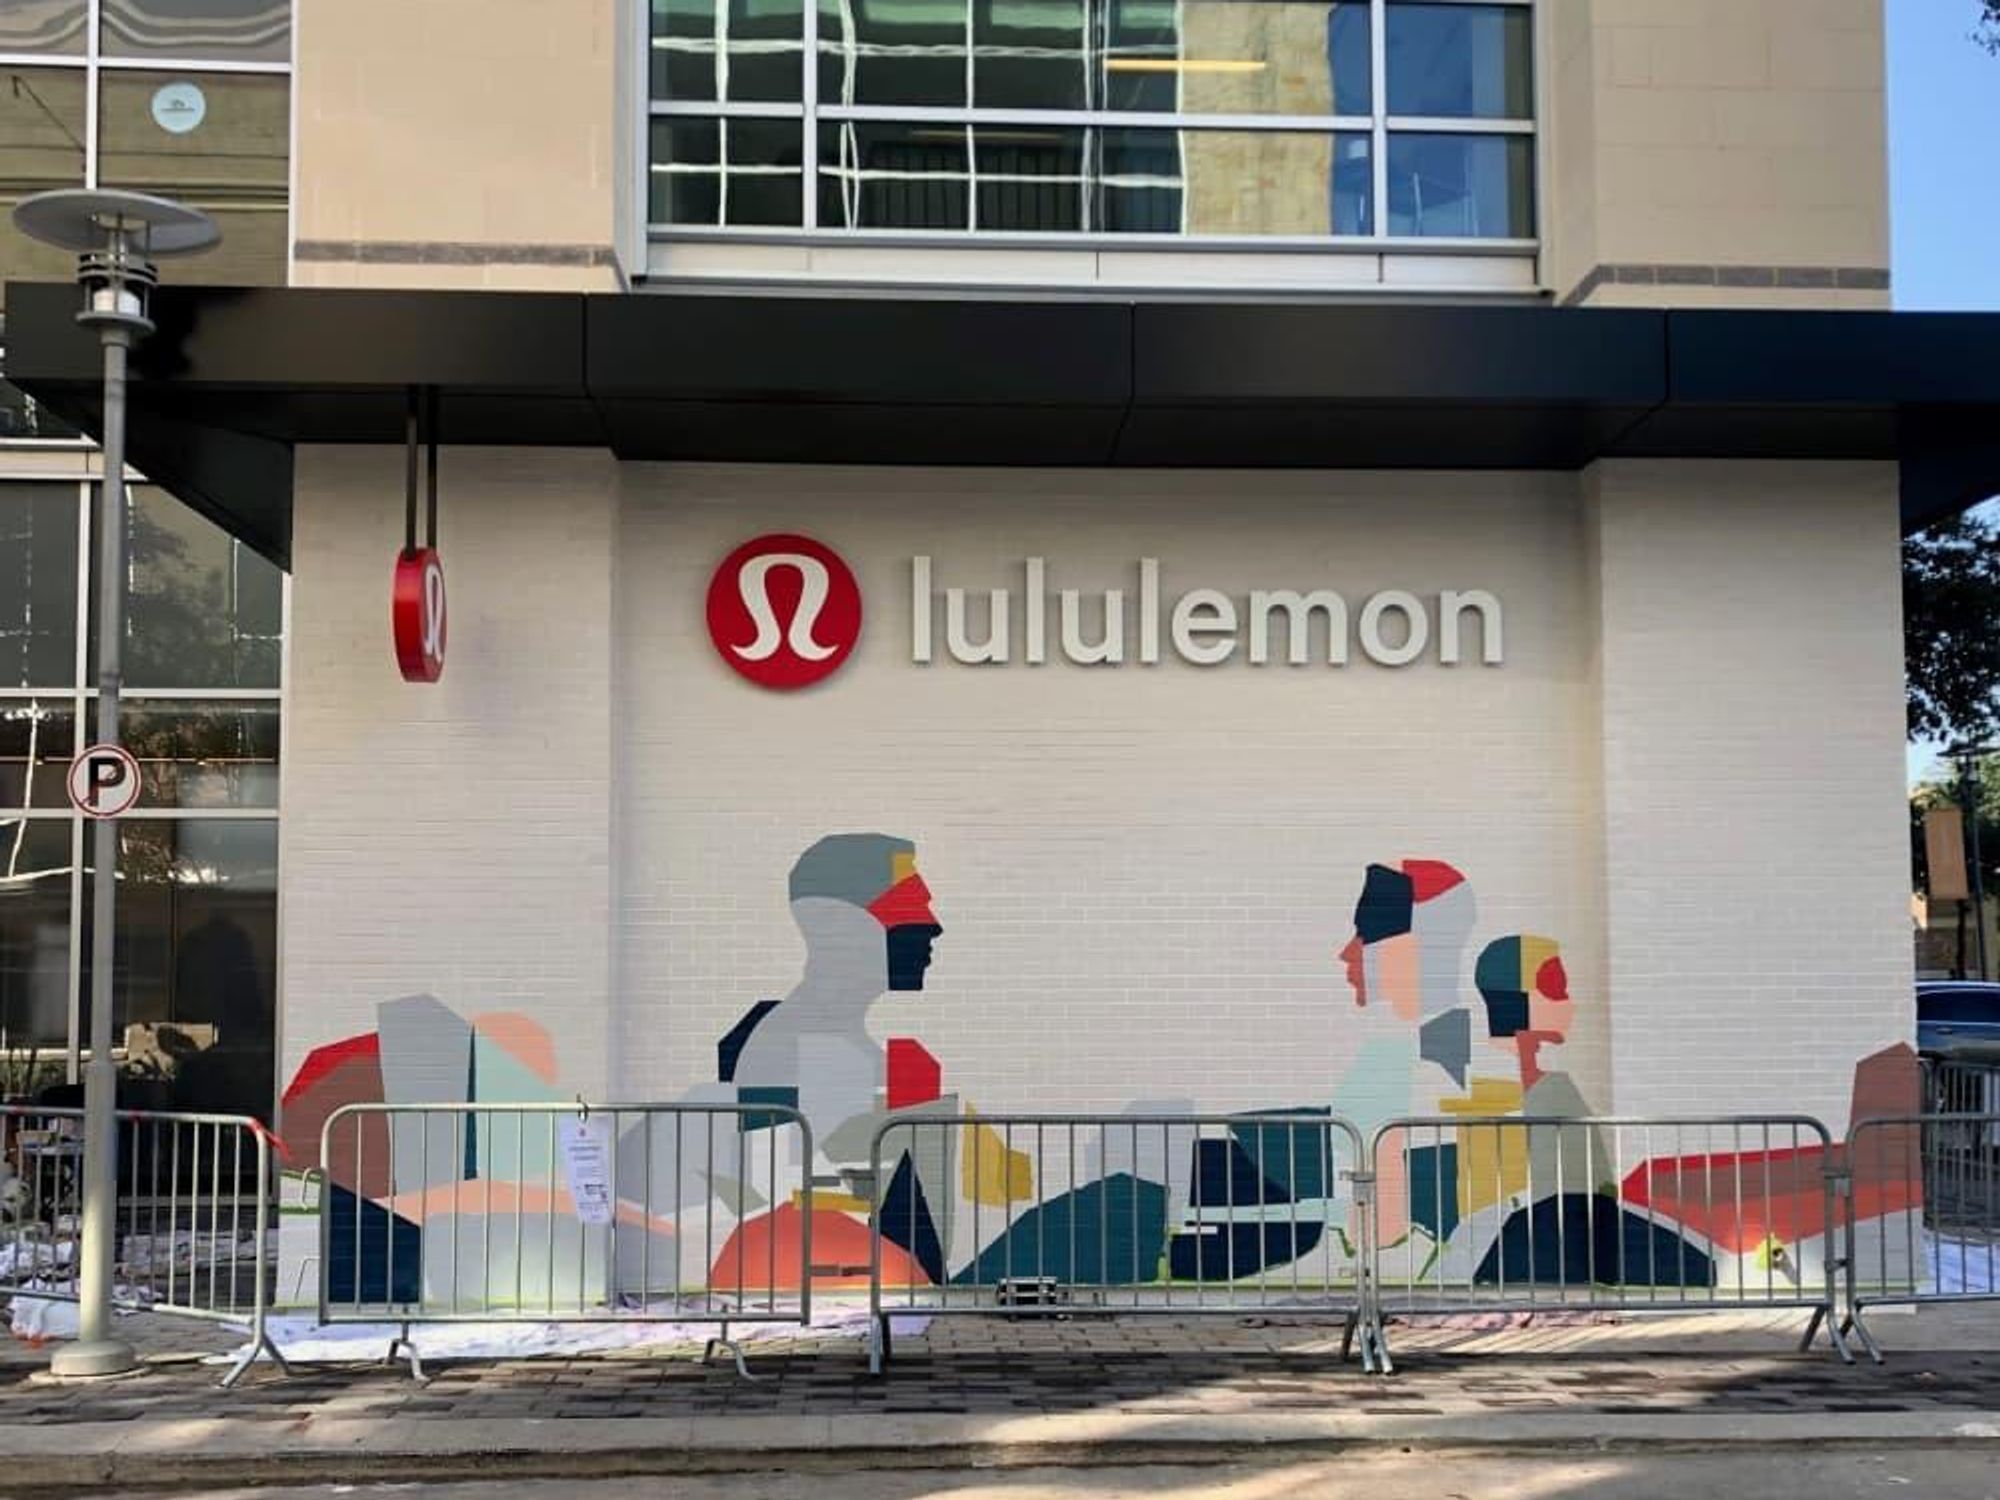 Lululemon and the Boston Red Sox Have Collaborated on Athleisure Gear